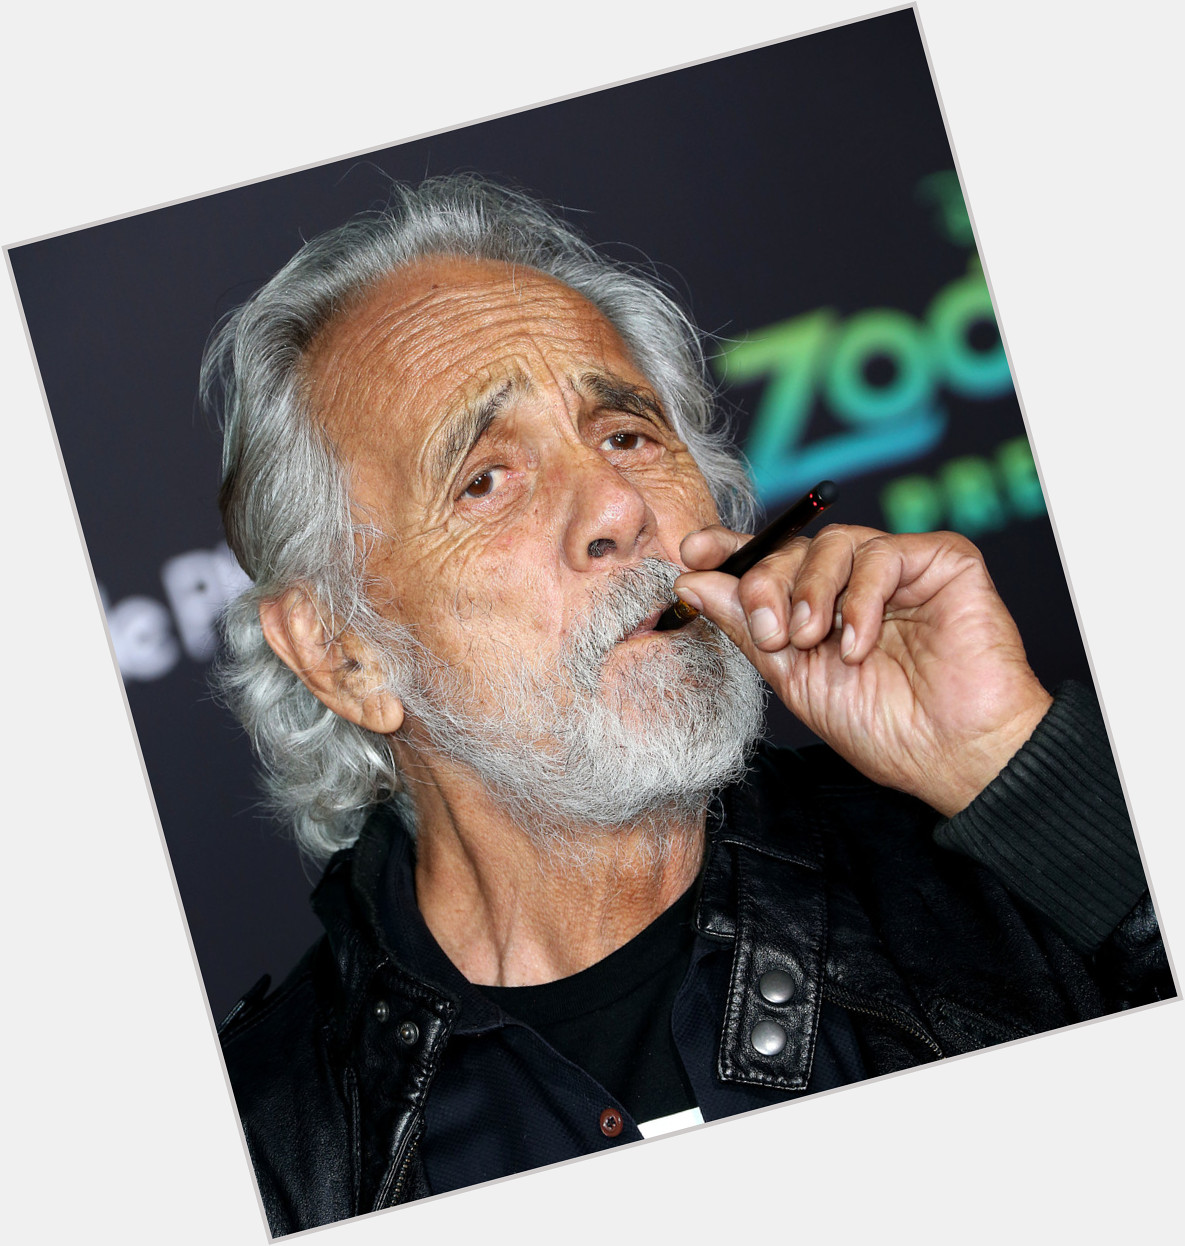 Happy Birthday, Tommy Chong
For Disney, he voiced Yax the Yak in the 2016 Disney animated feature film, 